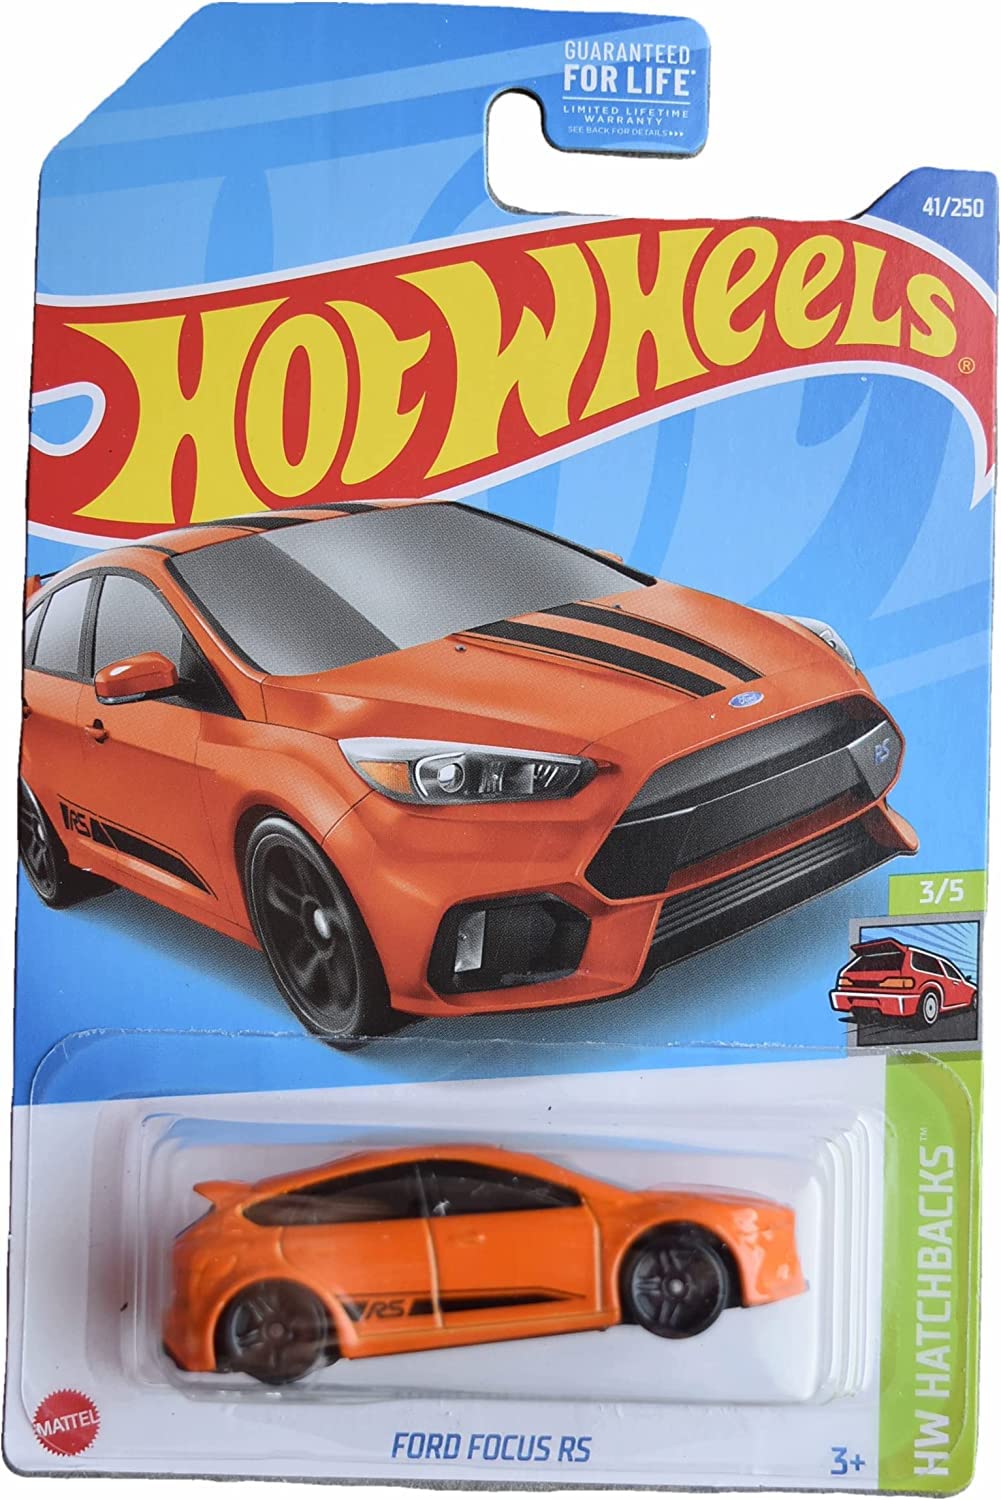 Amazon.com: Hot Wheels Ford Focus RS : Toys & Games